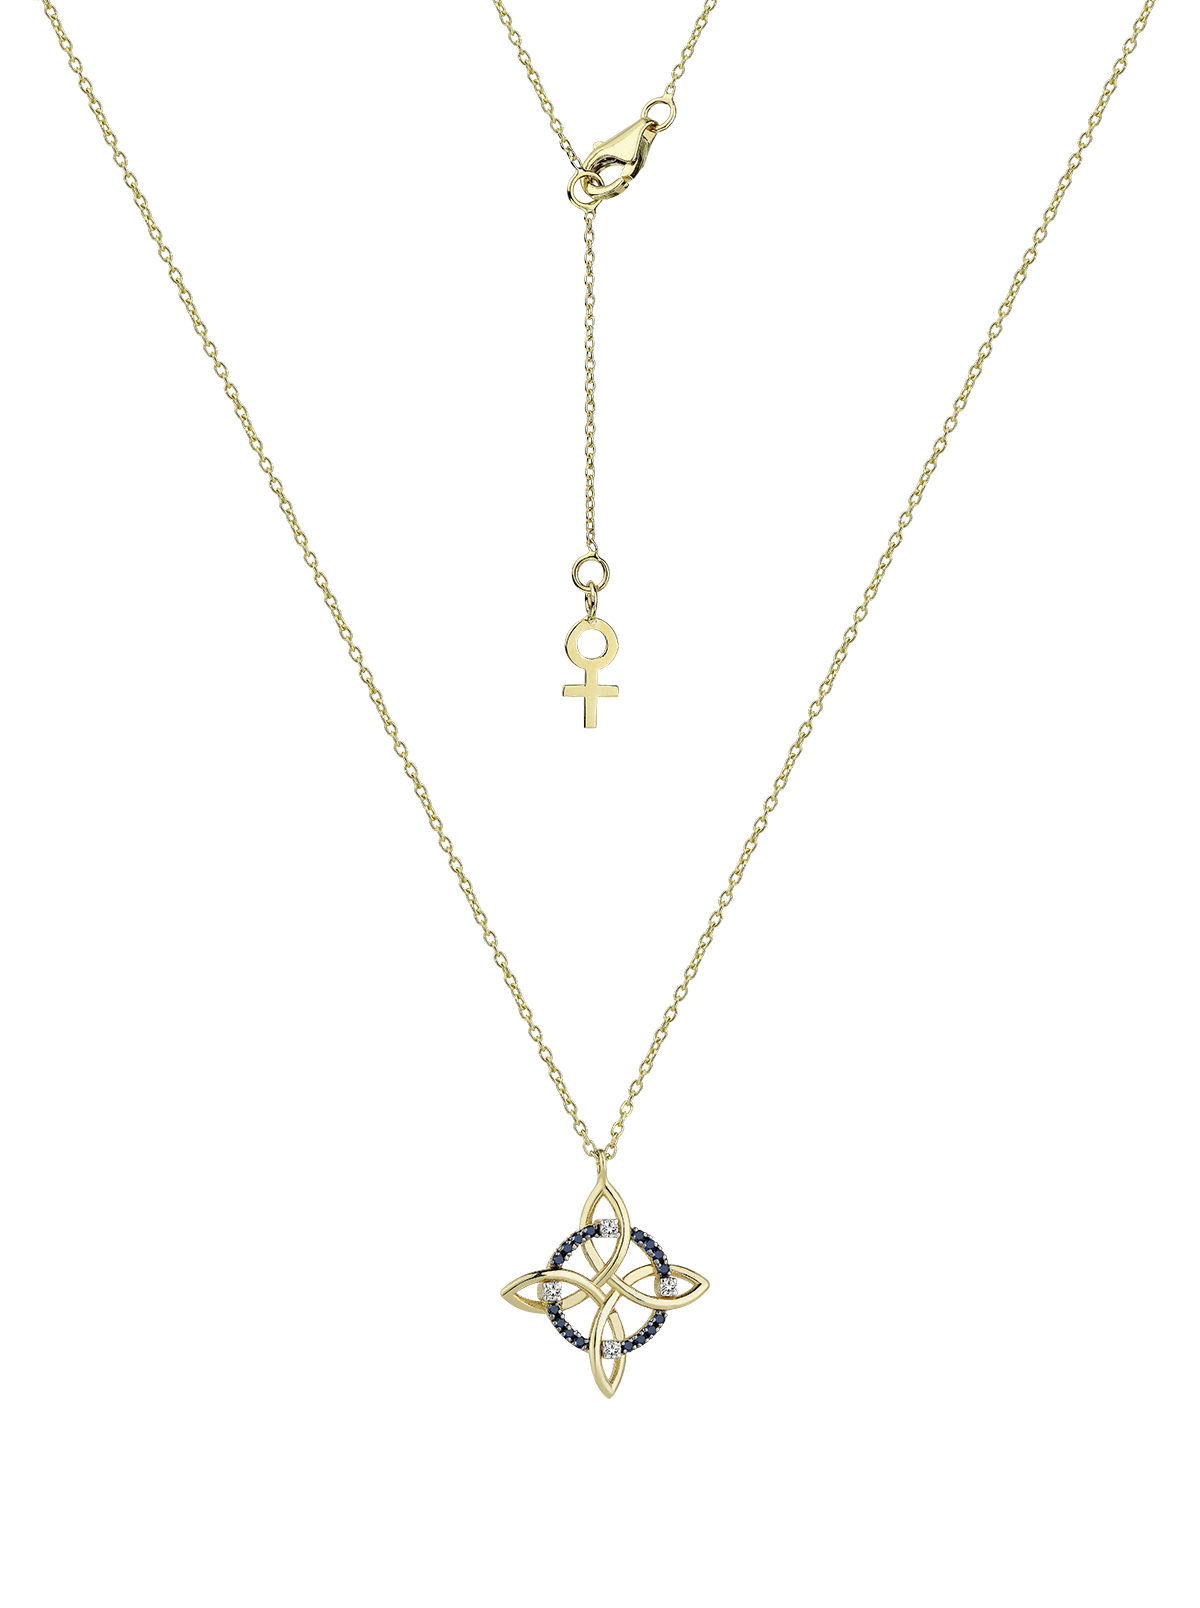 Magic Knot Necklace in Yellow Gold - Her Story Shop